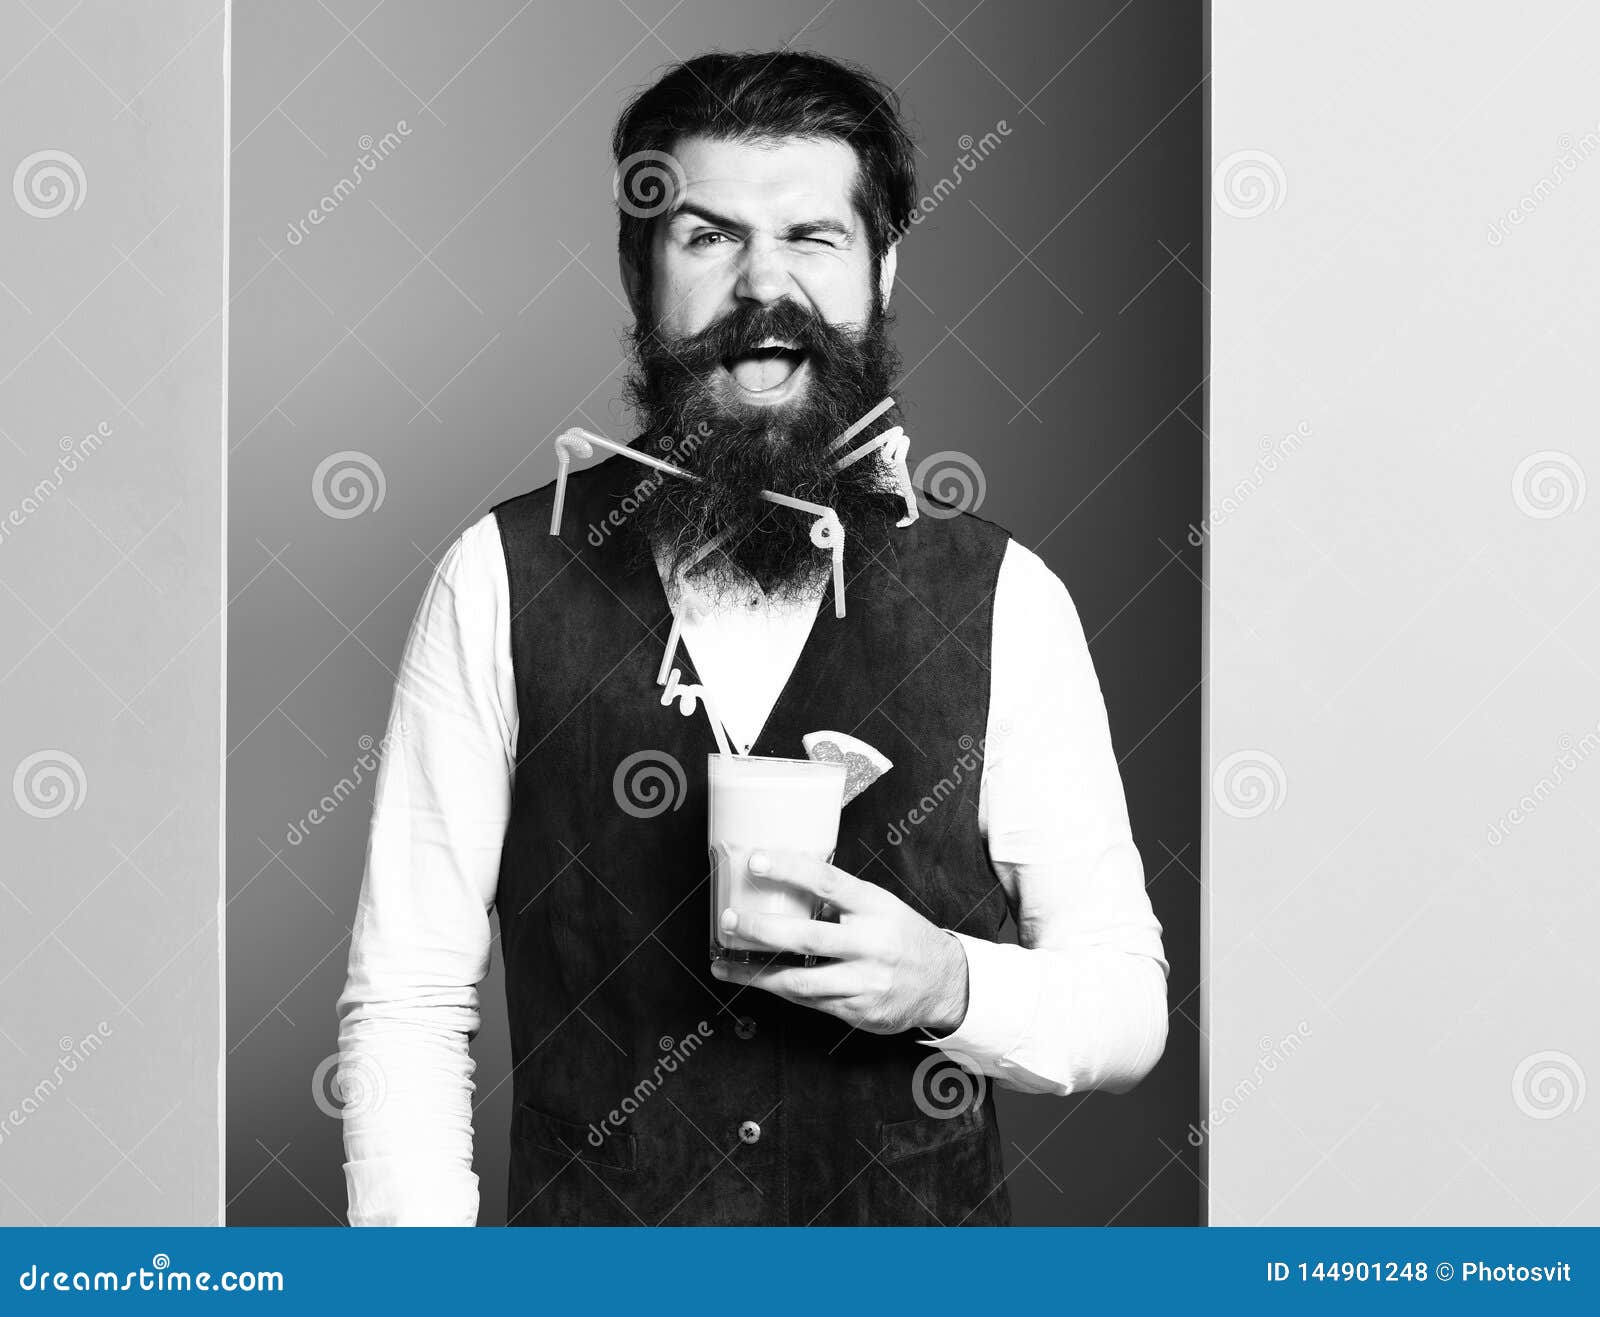 Handsome Bearded Man with Long Beard and Mustache Has Stylish Hair on ...